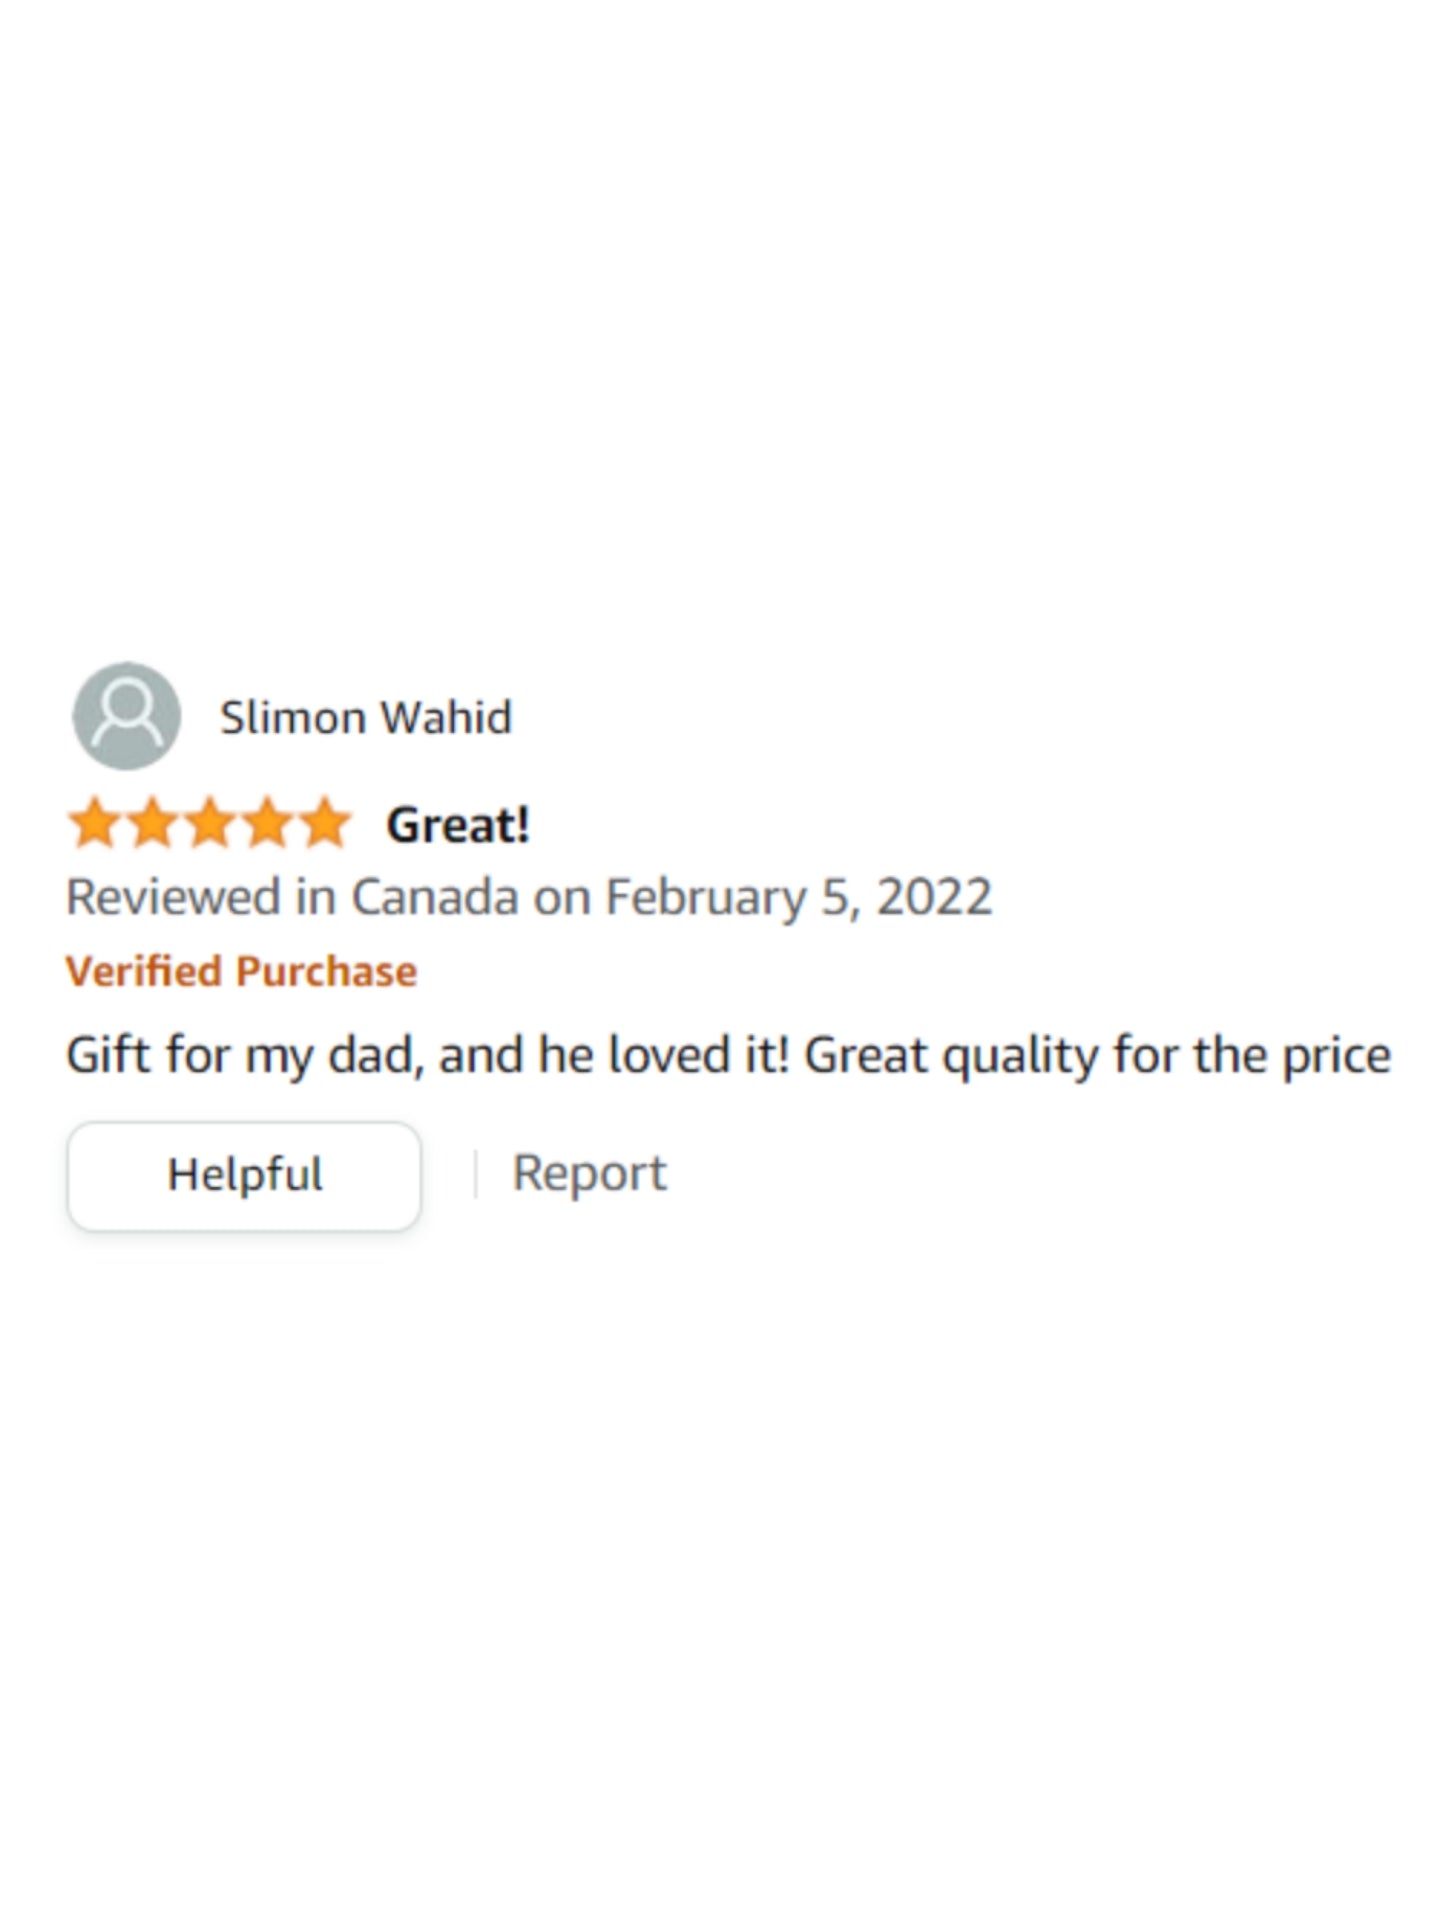 5 Star Amazon Review for RM tool belt, Carpenter pouch